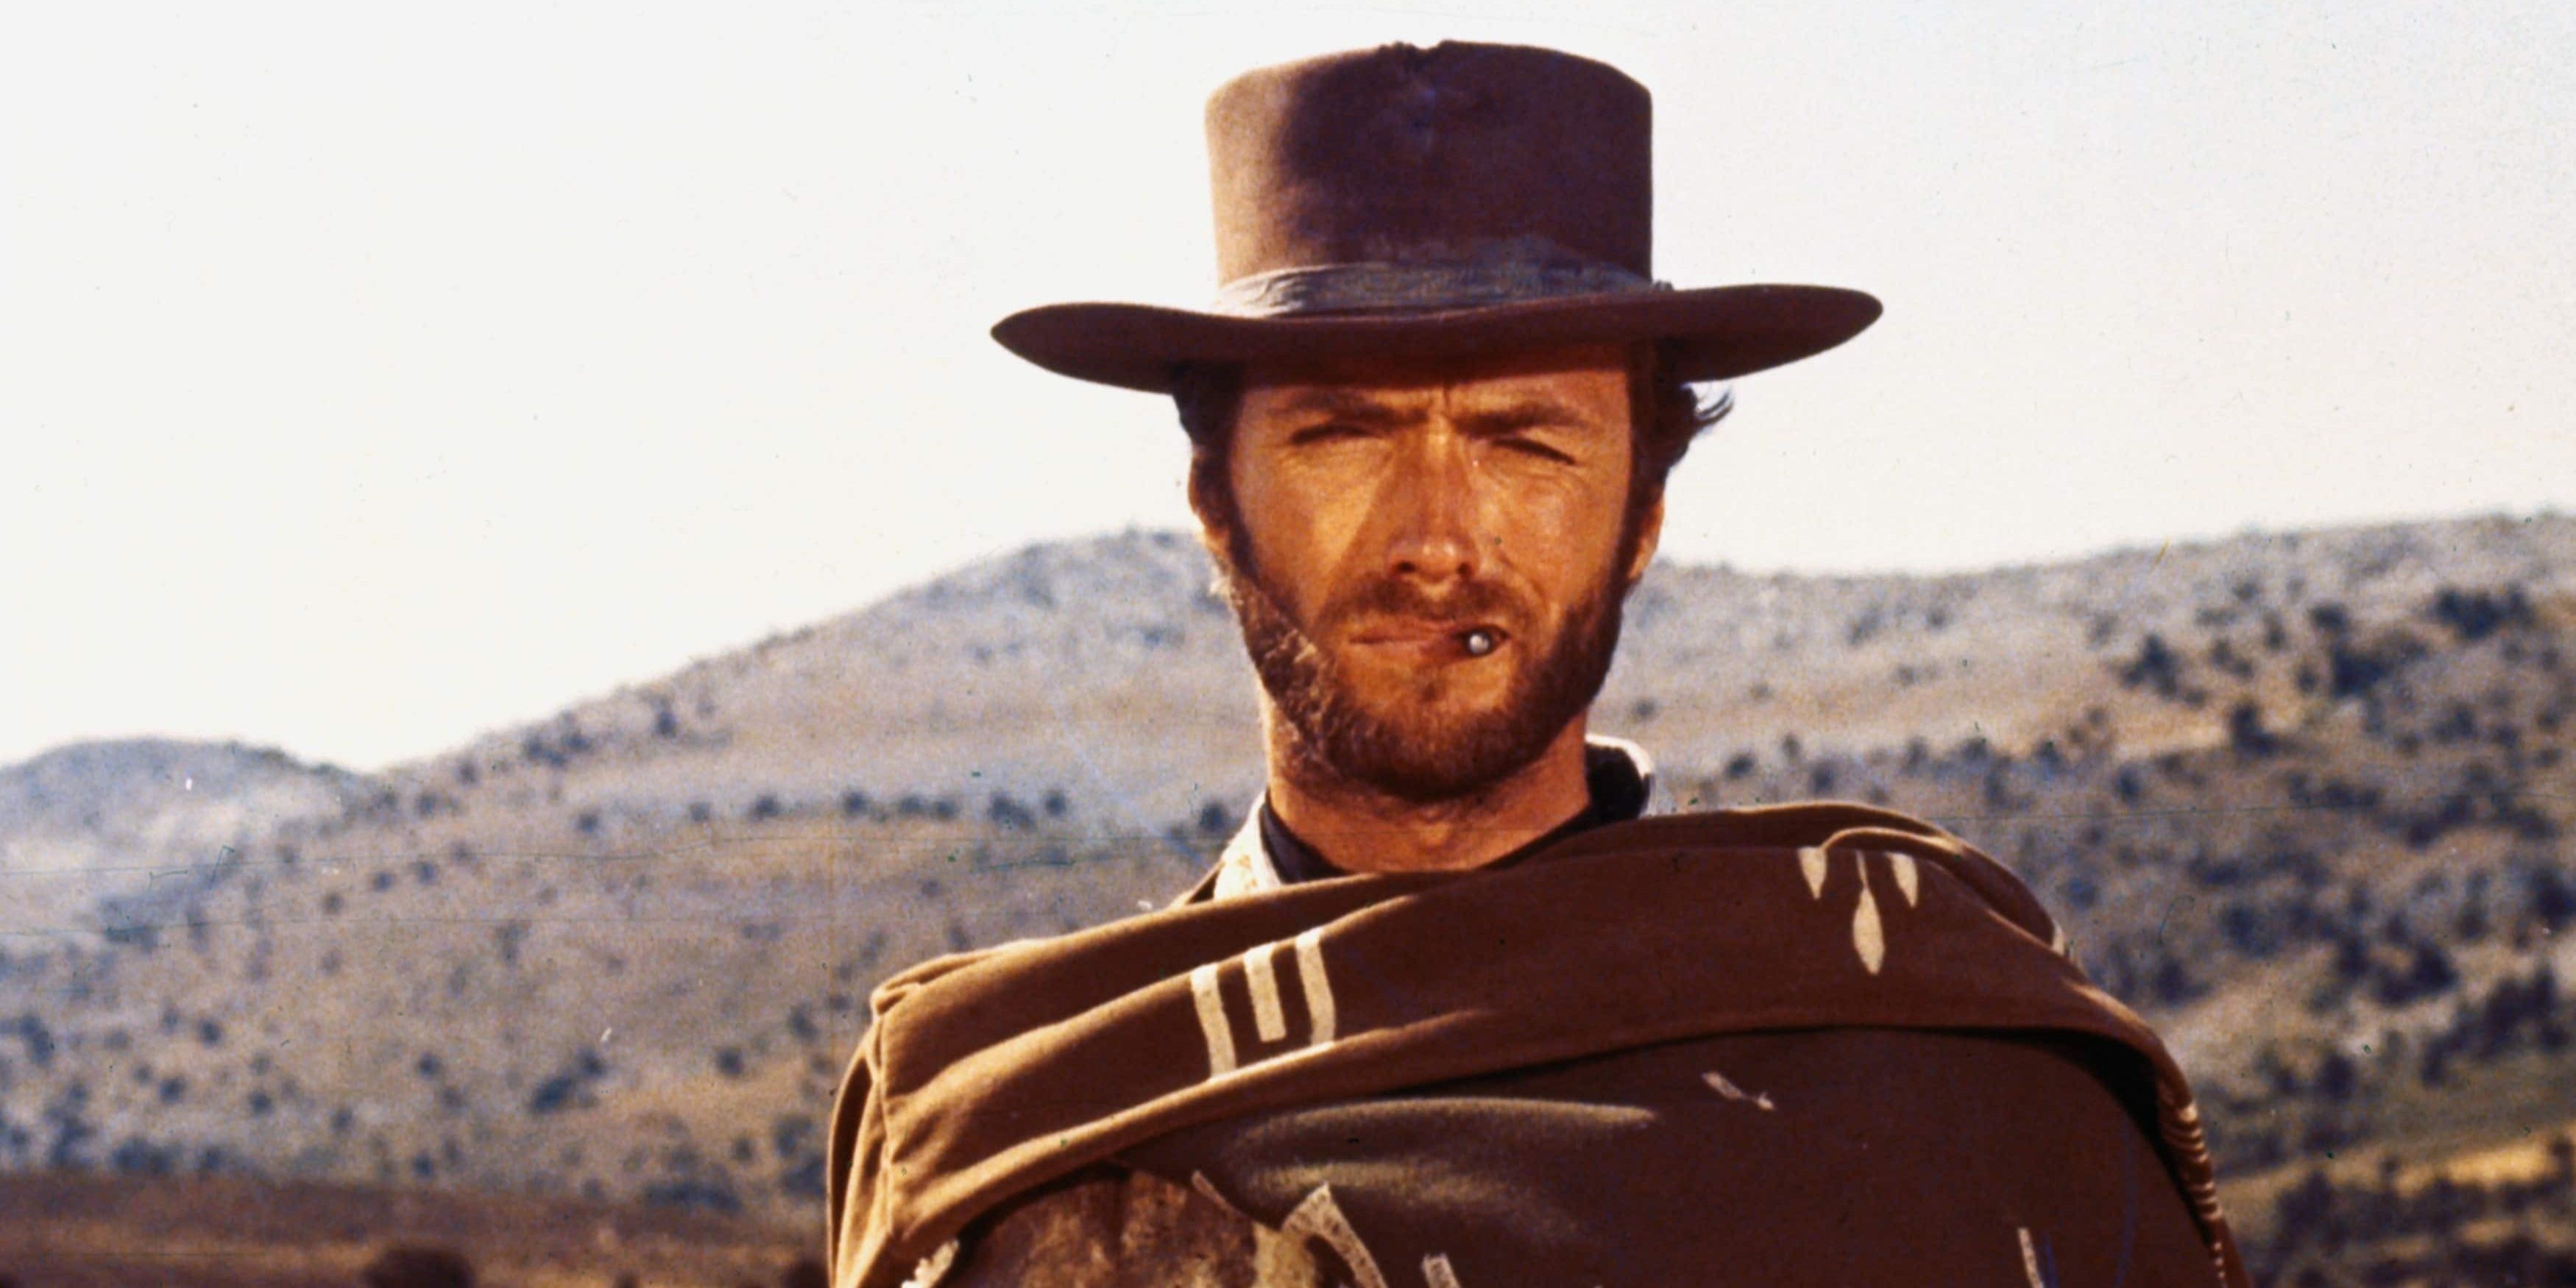 The good, the bad, and the ugly - Clint Eastwood